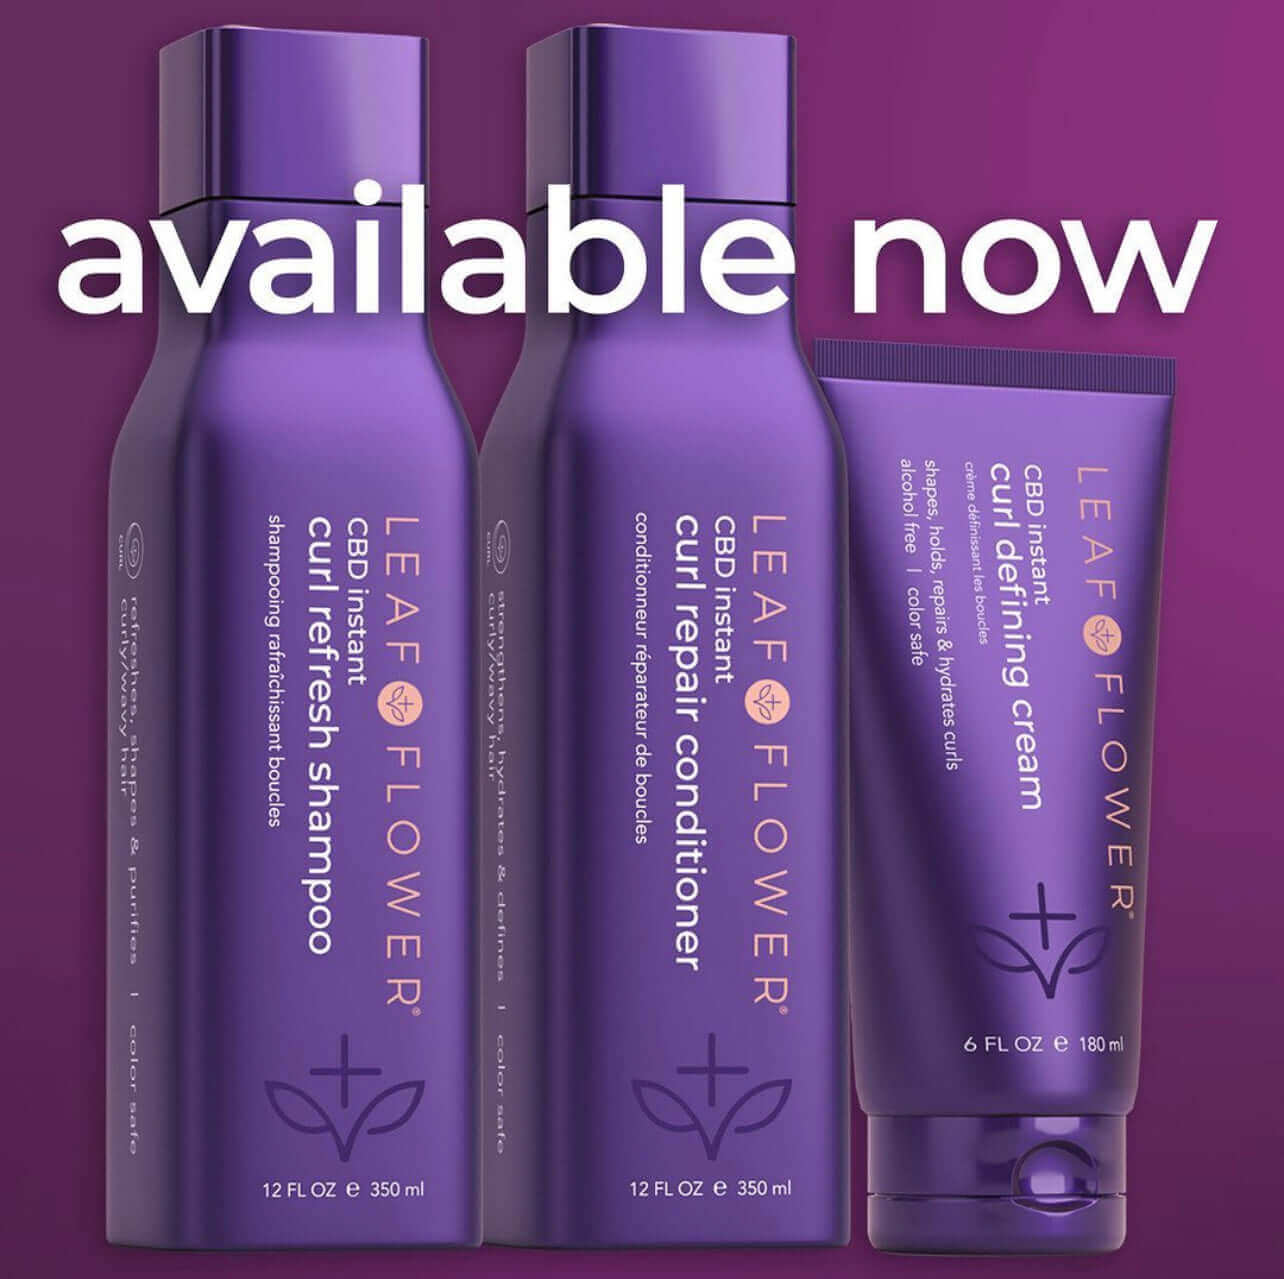 A collection of Leaf & Flower Instant Curl Repair Shampoo and Conditioner Duo hair care products on a purple background with the text "available now".